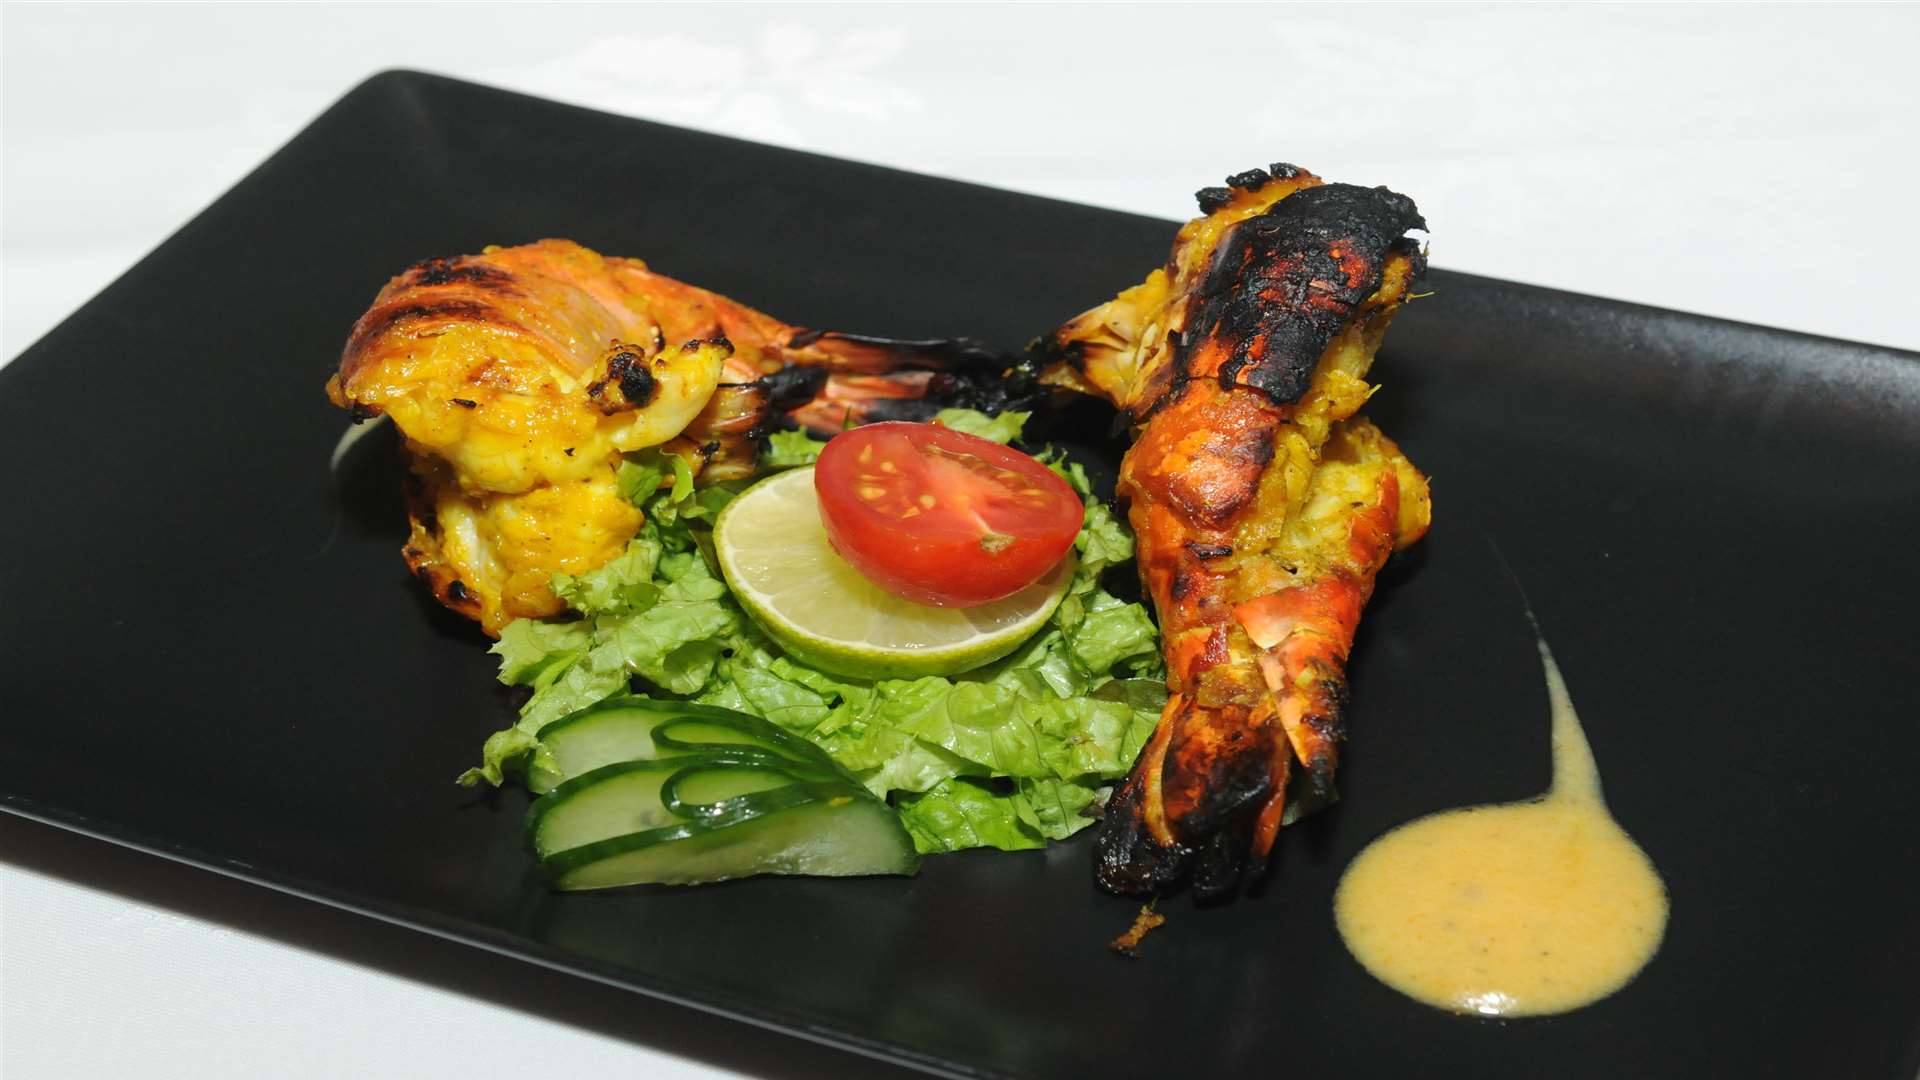 The Shozna menu is packed with tempting Indian and Bangladeshi dishes